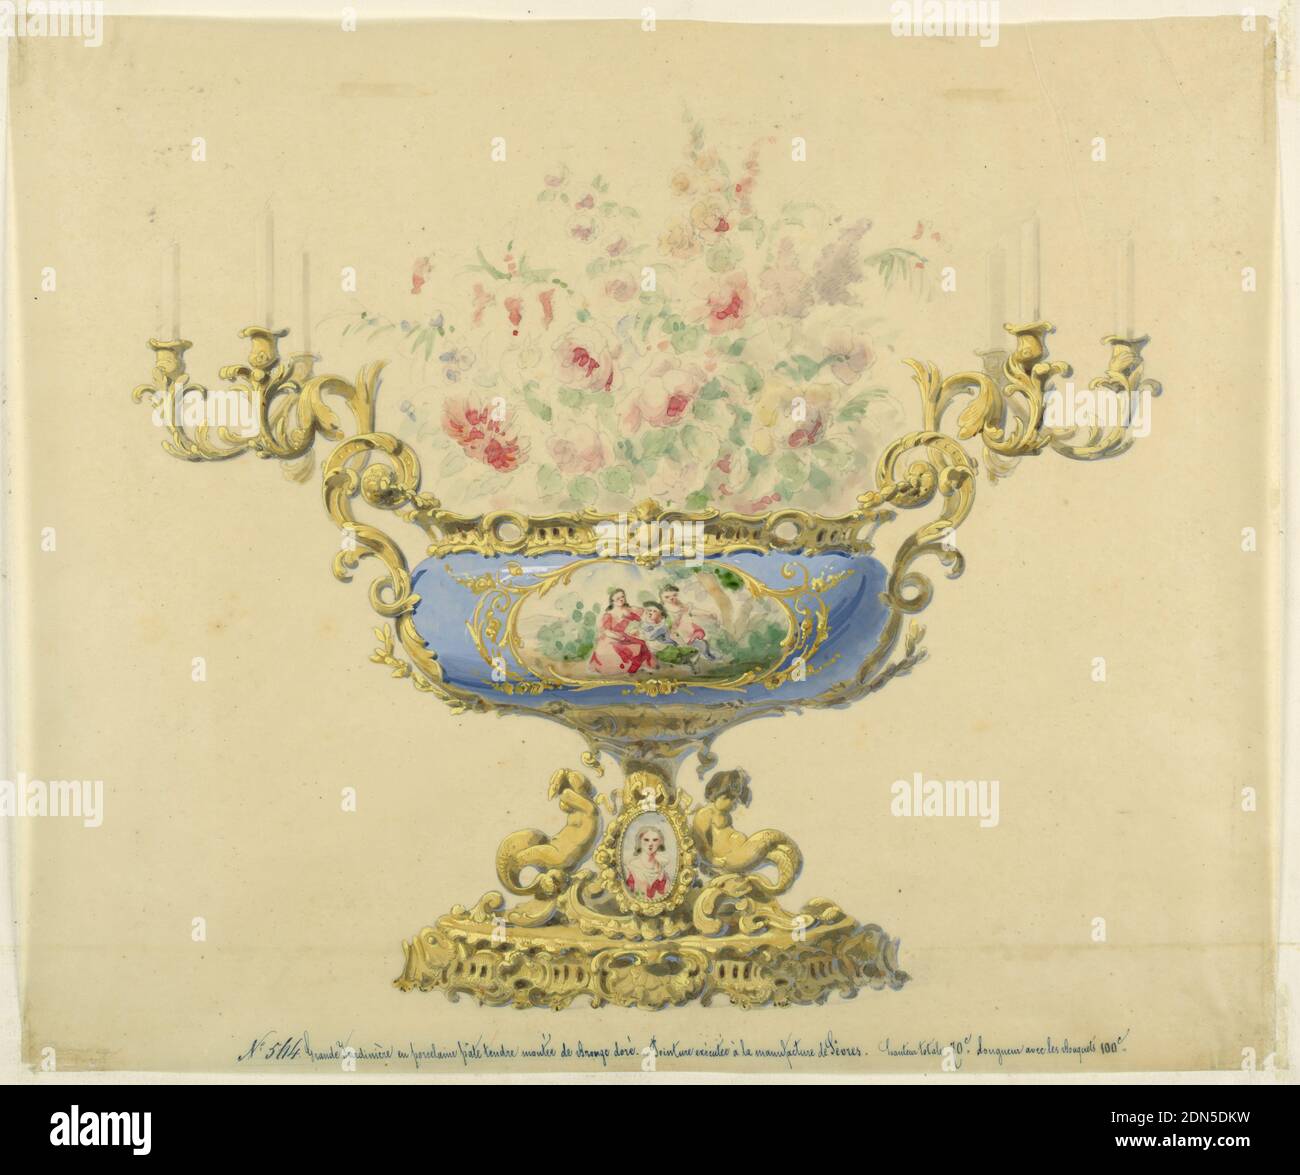 Design for a Jardiniere and Candelabrum, Pencil, brush with ink, watercolor, tempera colors, gold on trading paper, tipped down., The body of the jardiniere is of blue porcelain, with a central field depicting three figures in a landscape, within a narrow gold frame. Mounted on a bronze base containing an oval porcelain portrait within it; flanked by handles terminiating in candelabra. Flowers in the jardiniere. Inscribed lower center: No. 564. Grande Jardiniere en porcelaine pate tendre montee da Bronze dore - Peinture exacutee a la manufacture de Sevres. Hauteur totale 70 Stock Photo